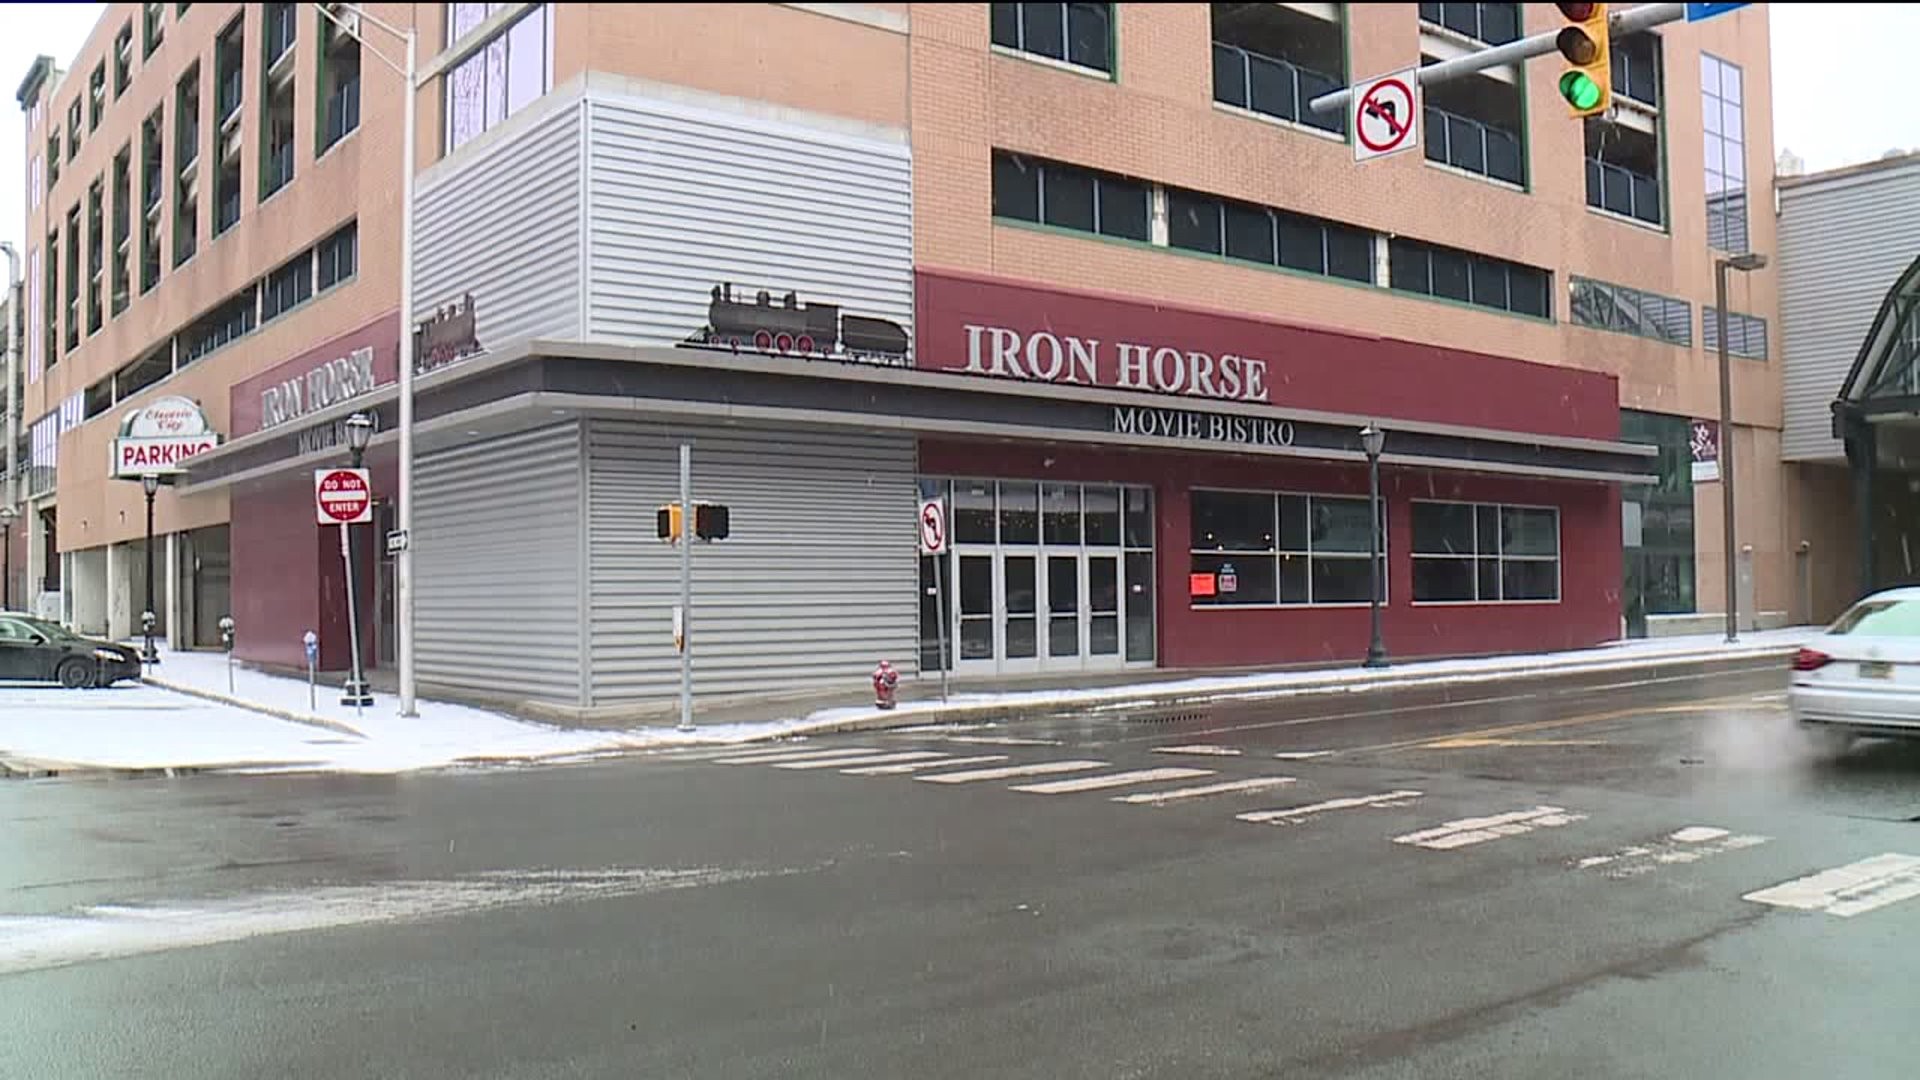 Iron Horse Movie Bistro in Scranton Getting Ready to Reopen